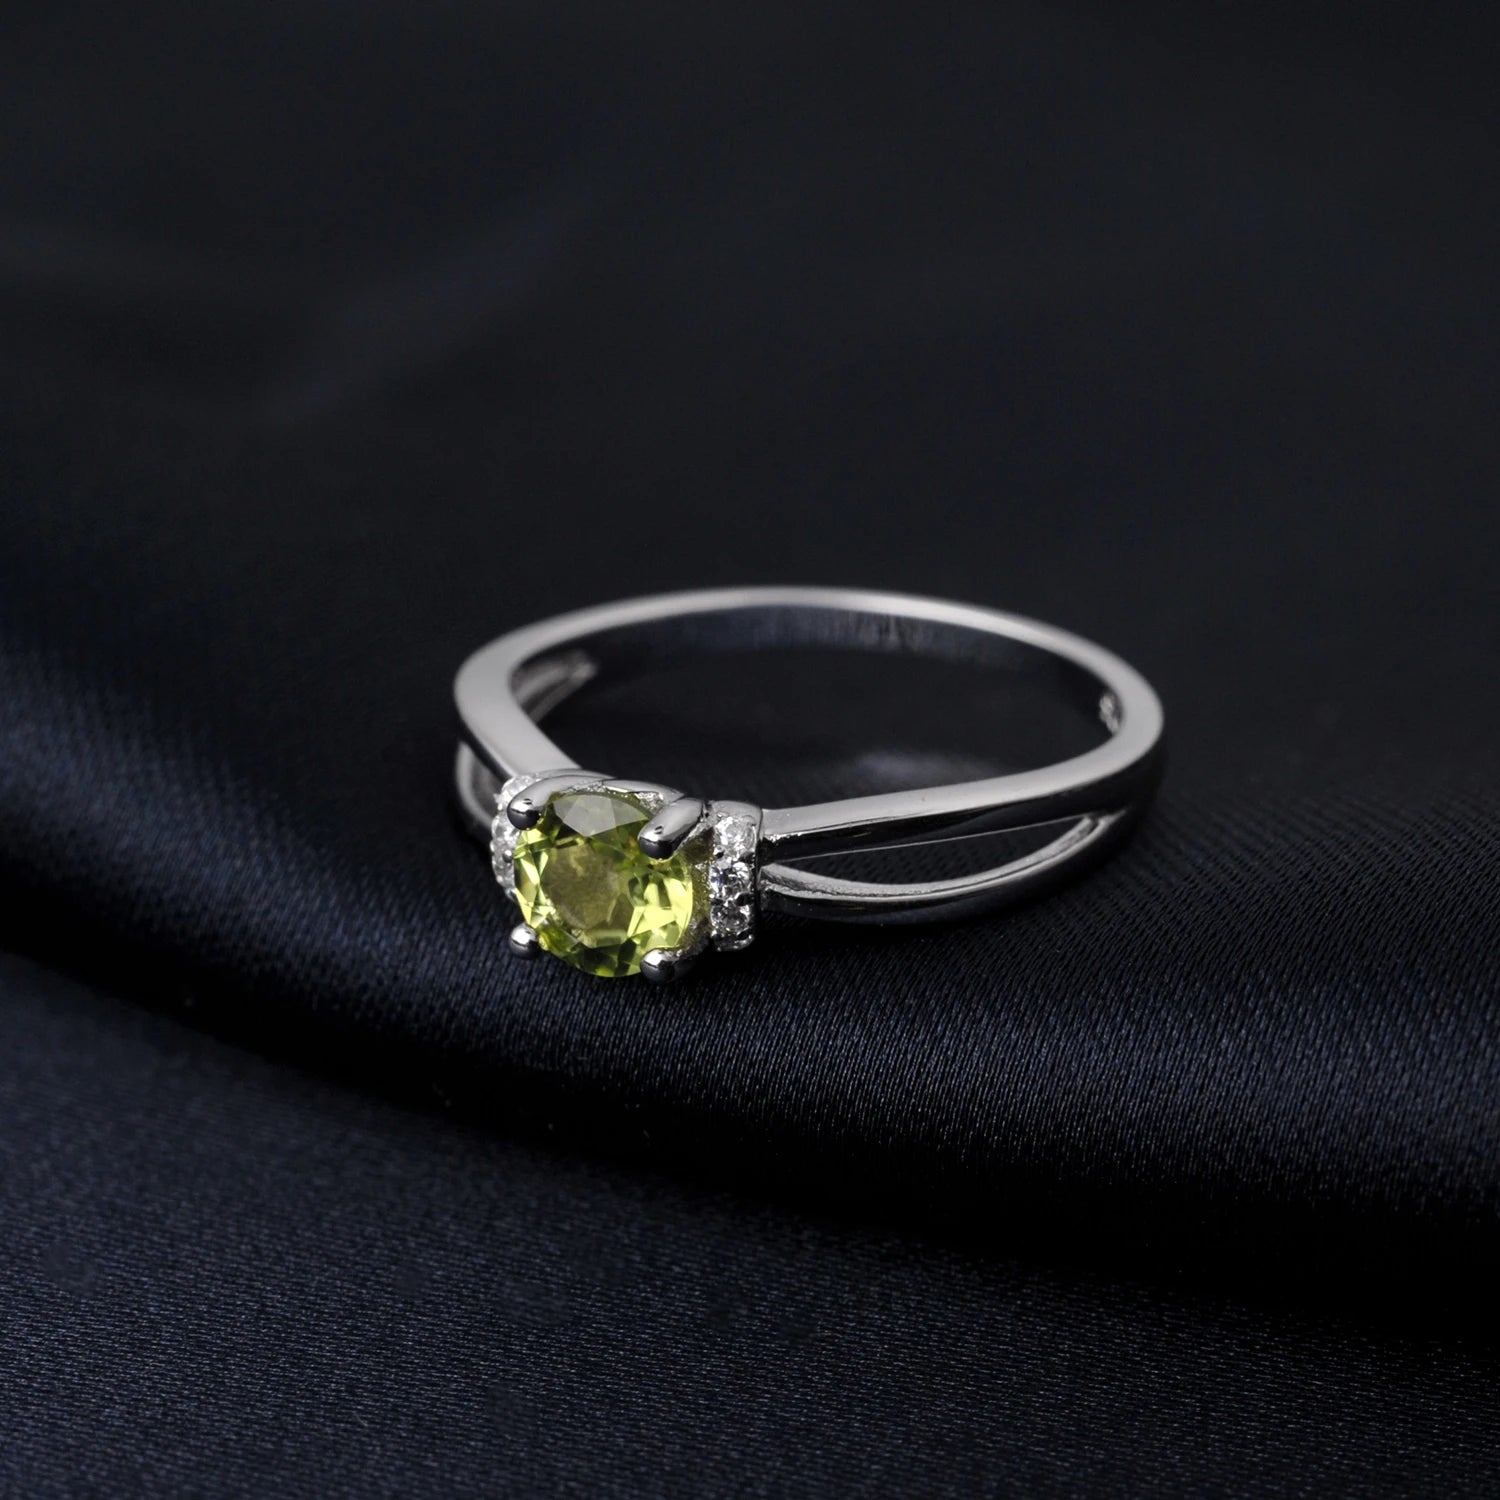 Round Genuine Natural Peridot 925 Sterling Silver Solitaire Ring